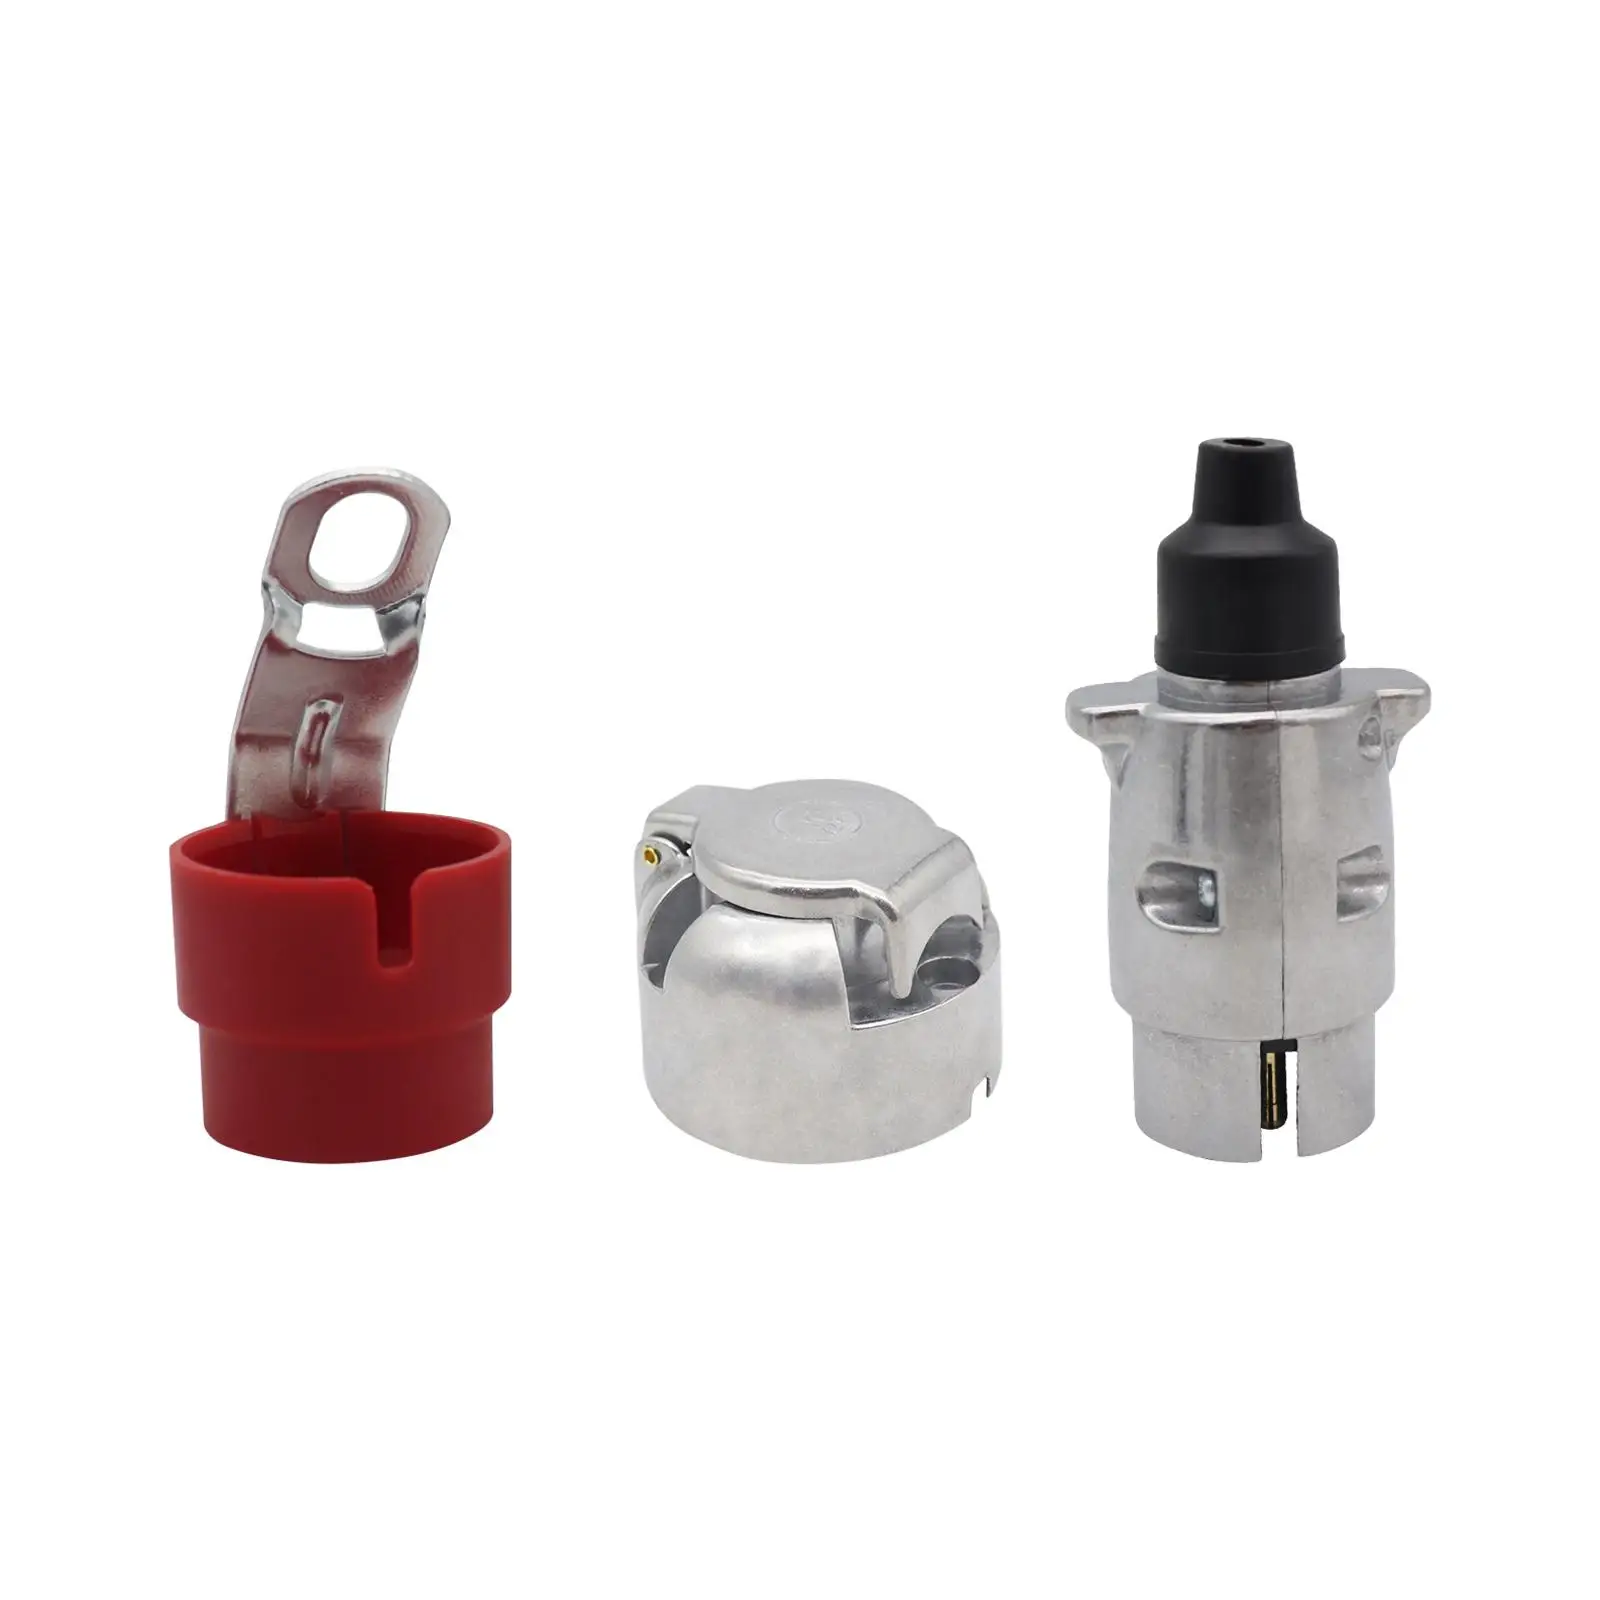 7 Pin Trailer Plug Connector Plug Holder Female Socket Male Plug Universal for RV Ships Boat Commercial Vehicles Tractor